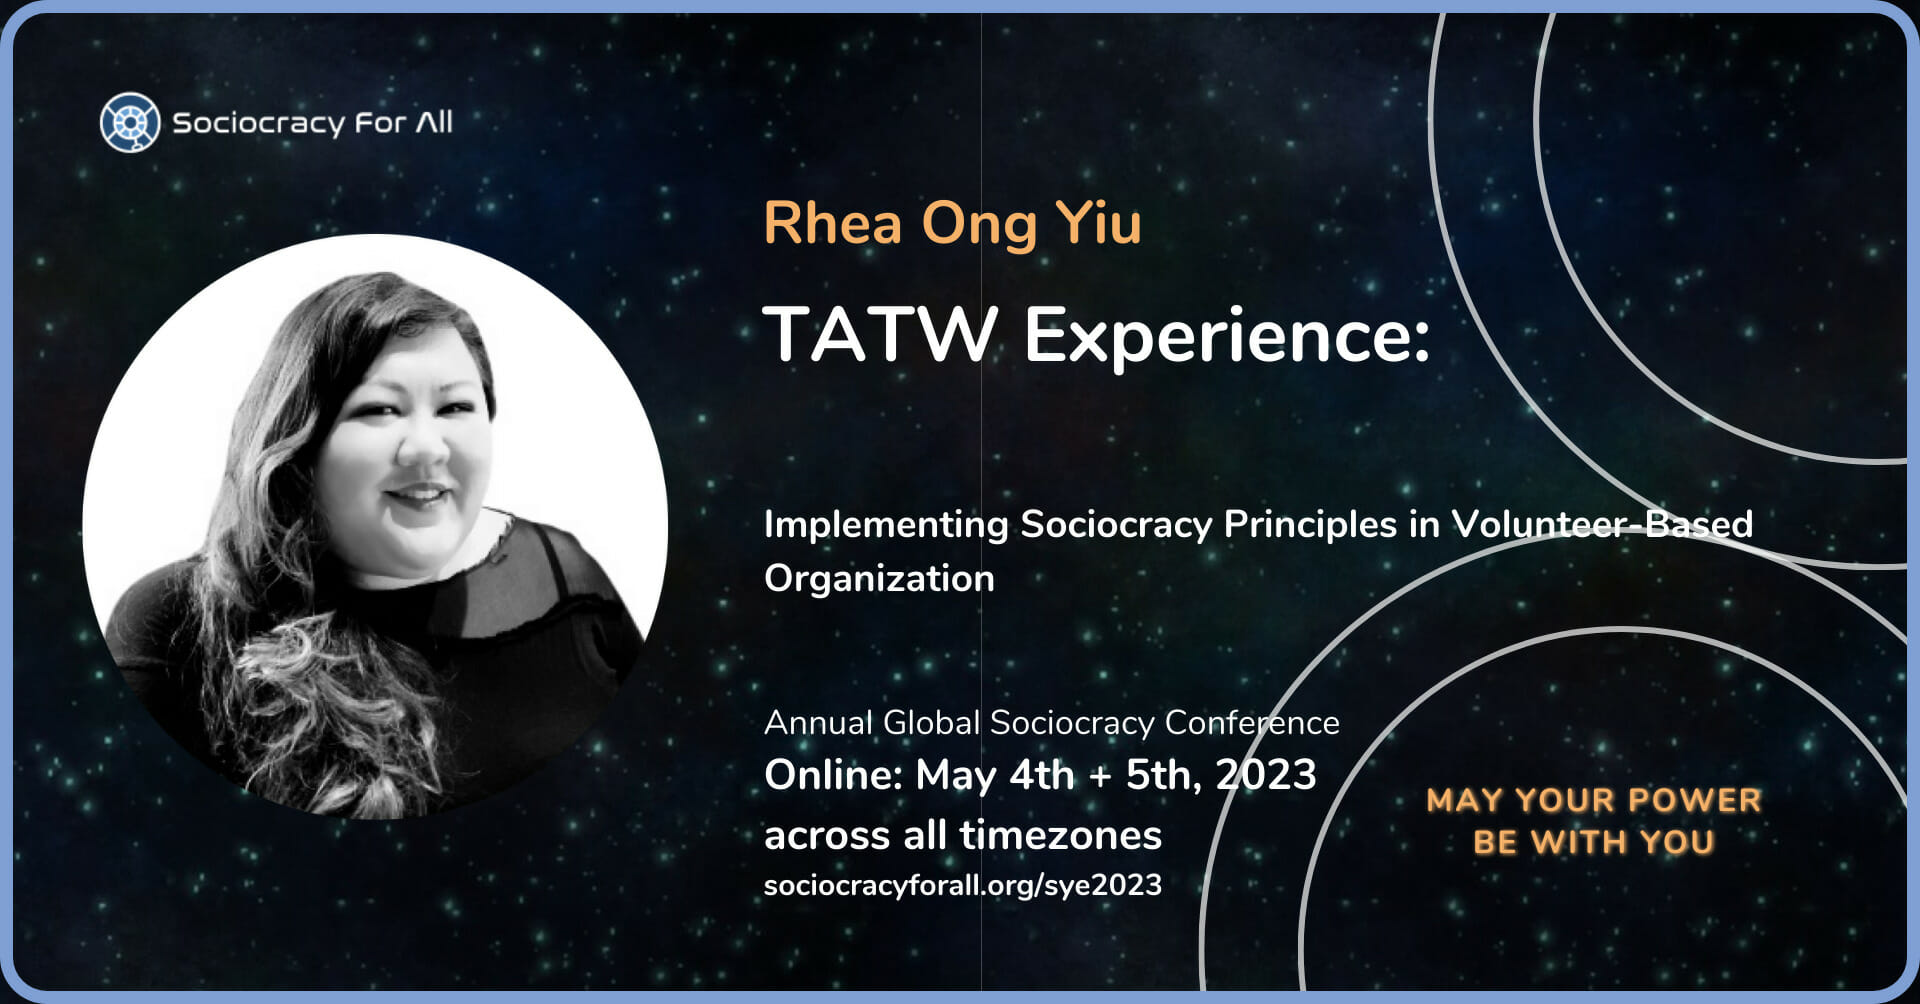 TATW Experience Implementing Sociocracy Principles in Volunteer-Based Organization